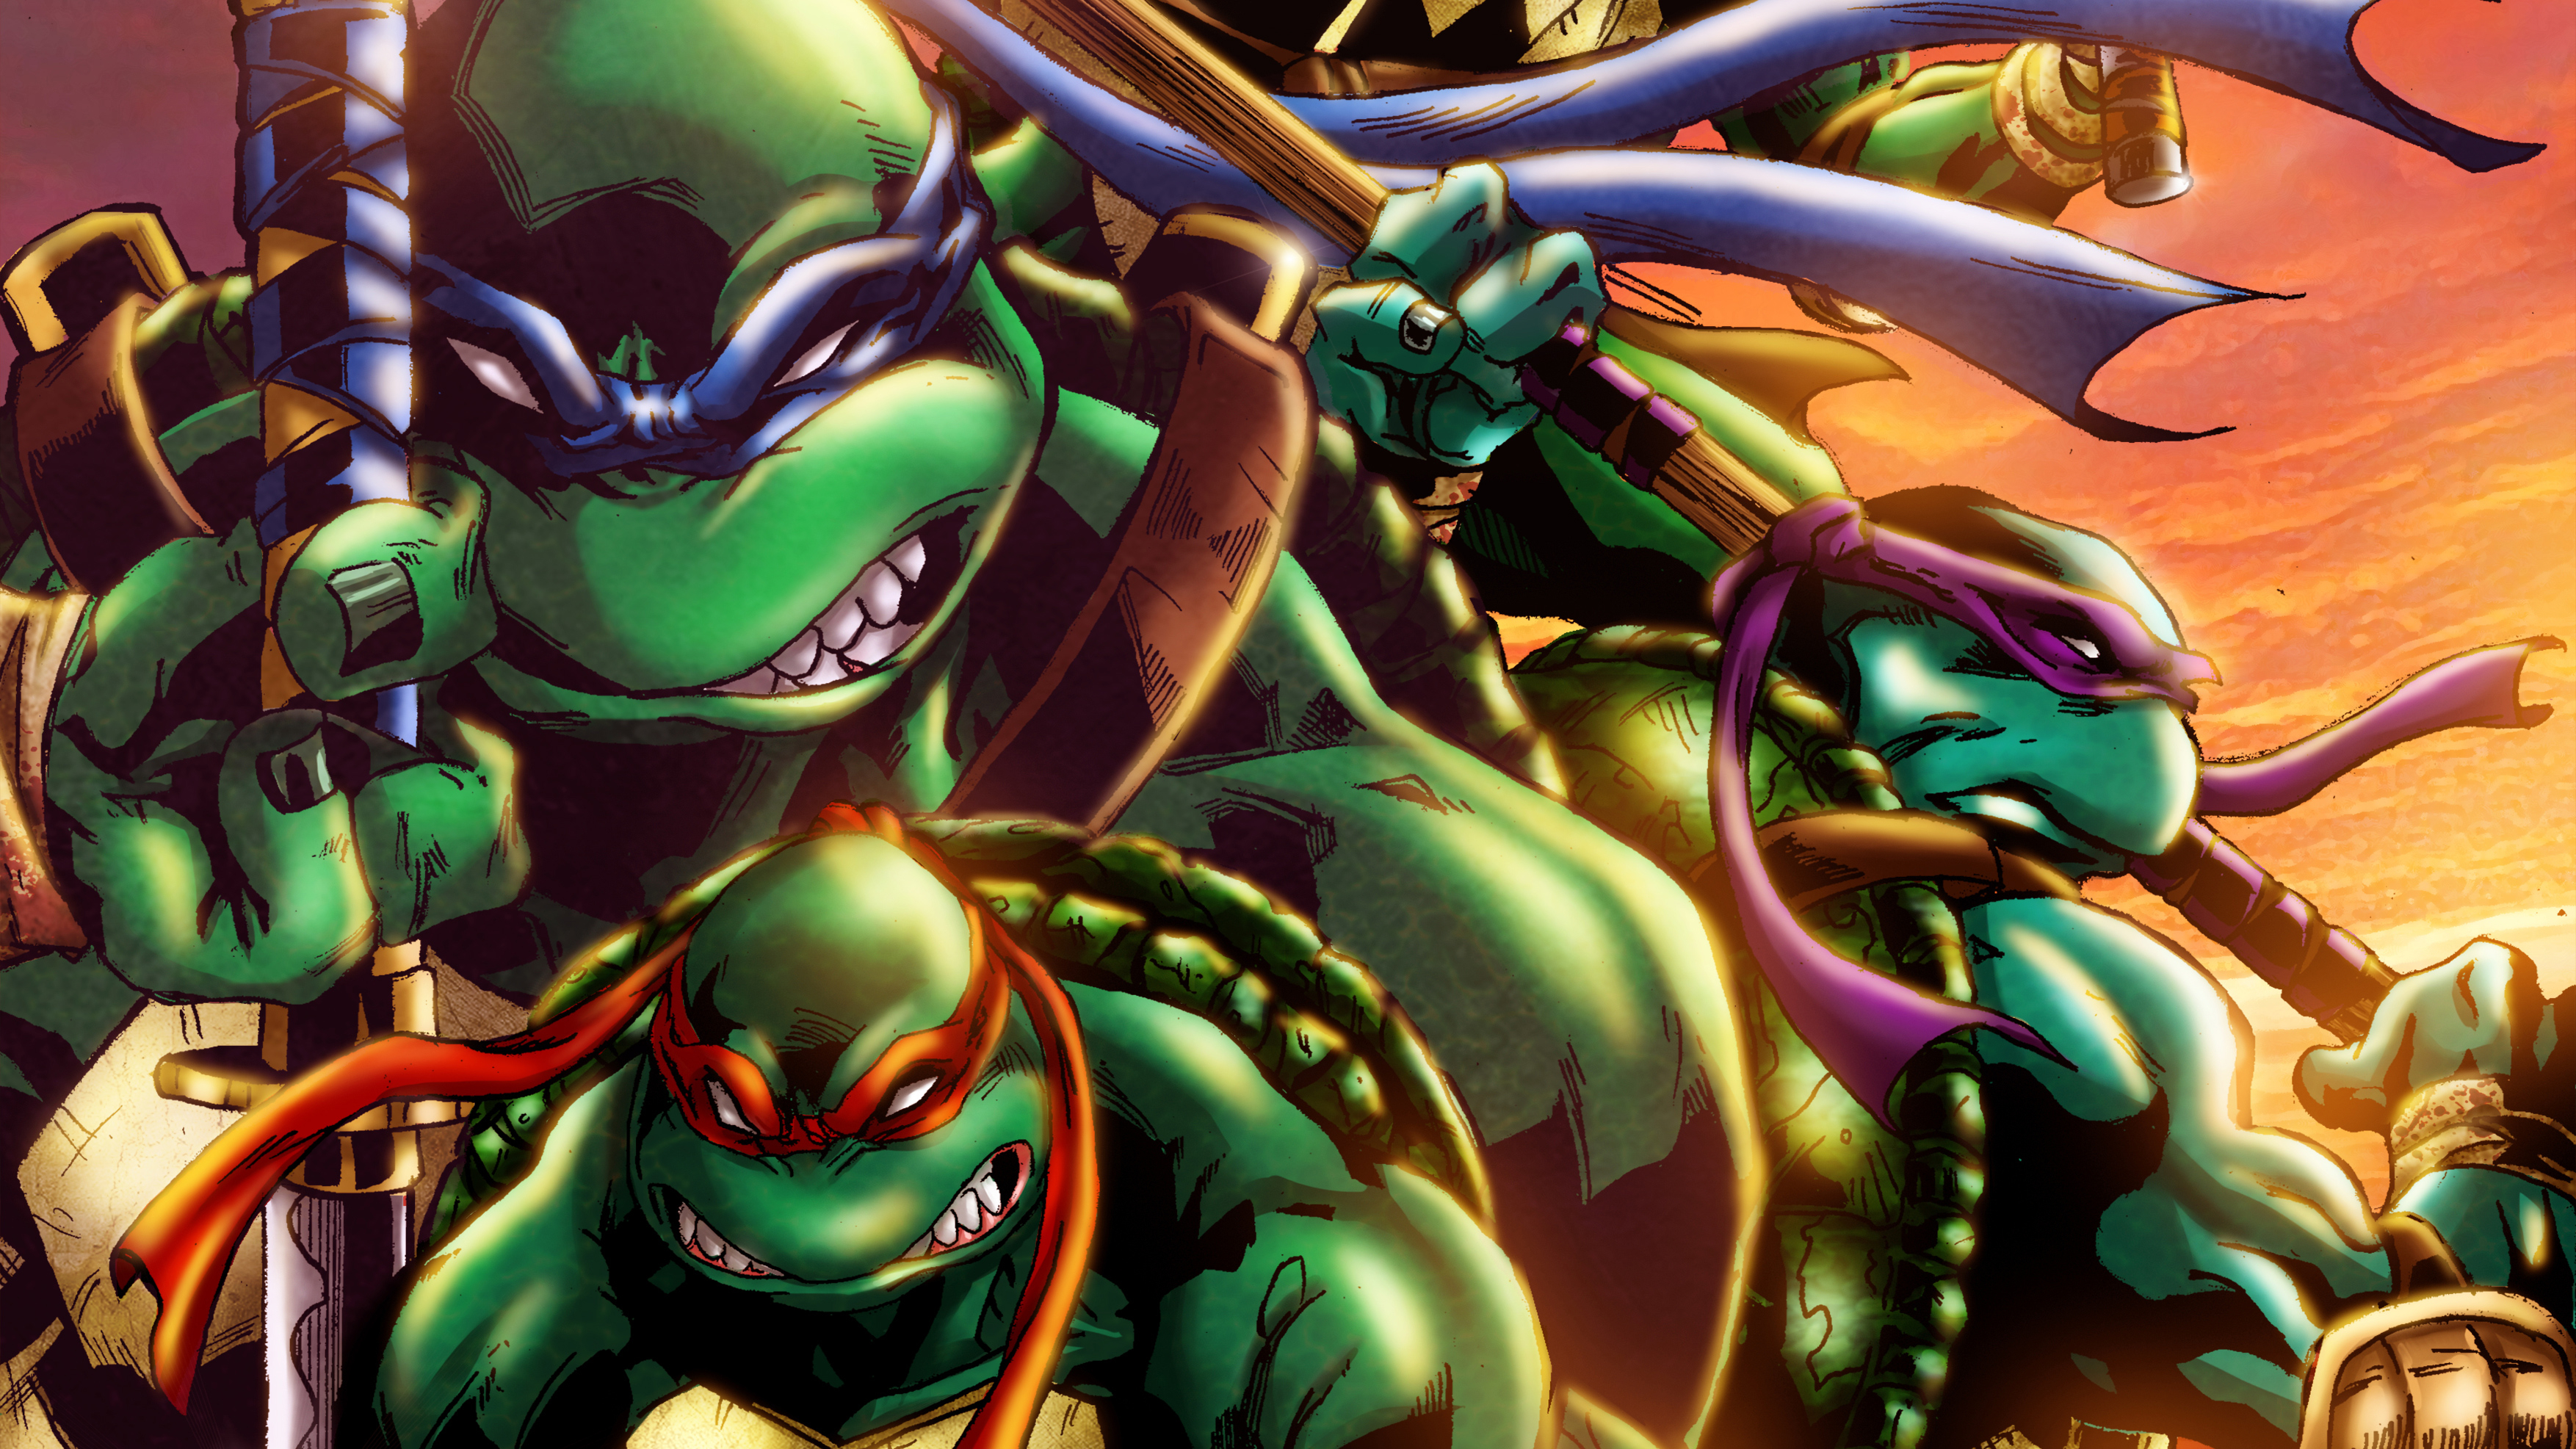 3508x1973 1920x1080 Teenage Mutant Ninja Turtles Art Laptop Full HD 1080P HD 4k Wallpapers, Images, Backgrounds, Photos and Pictures